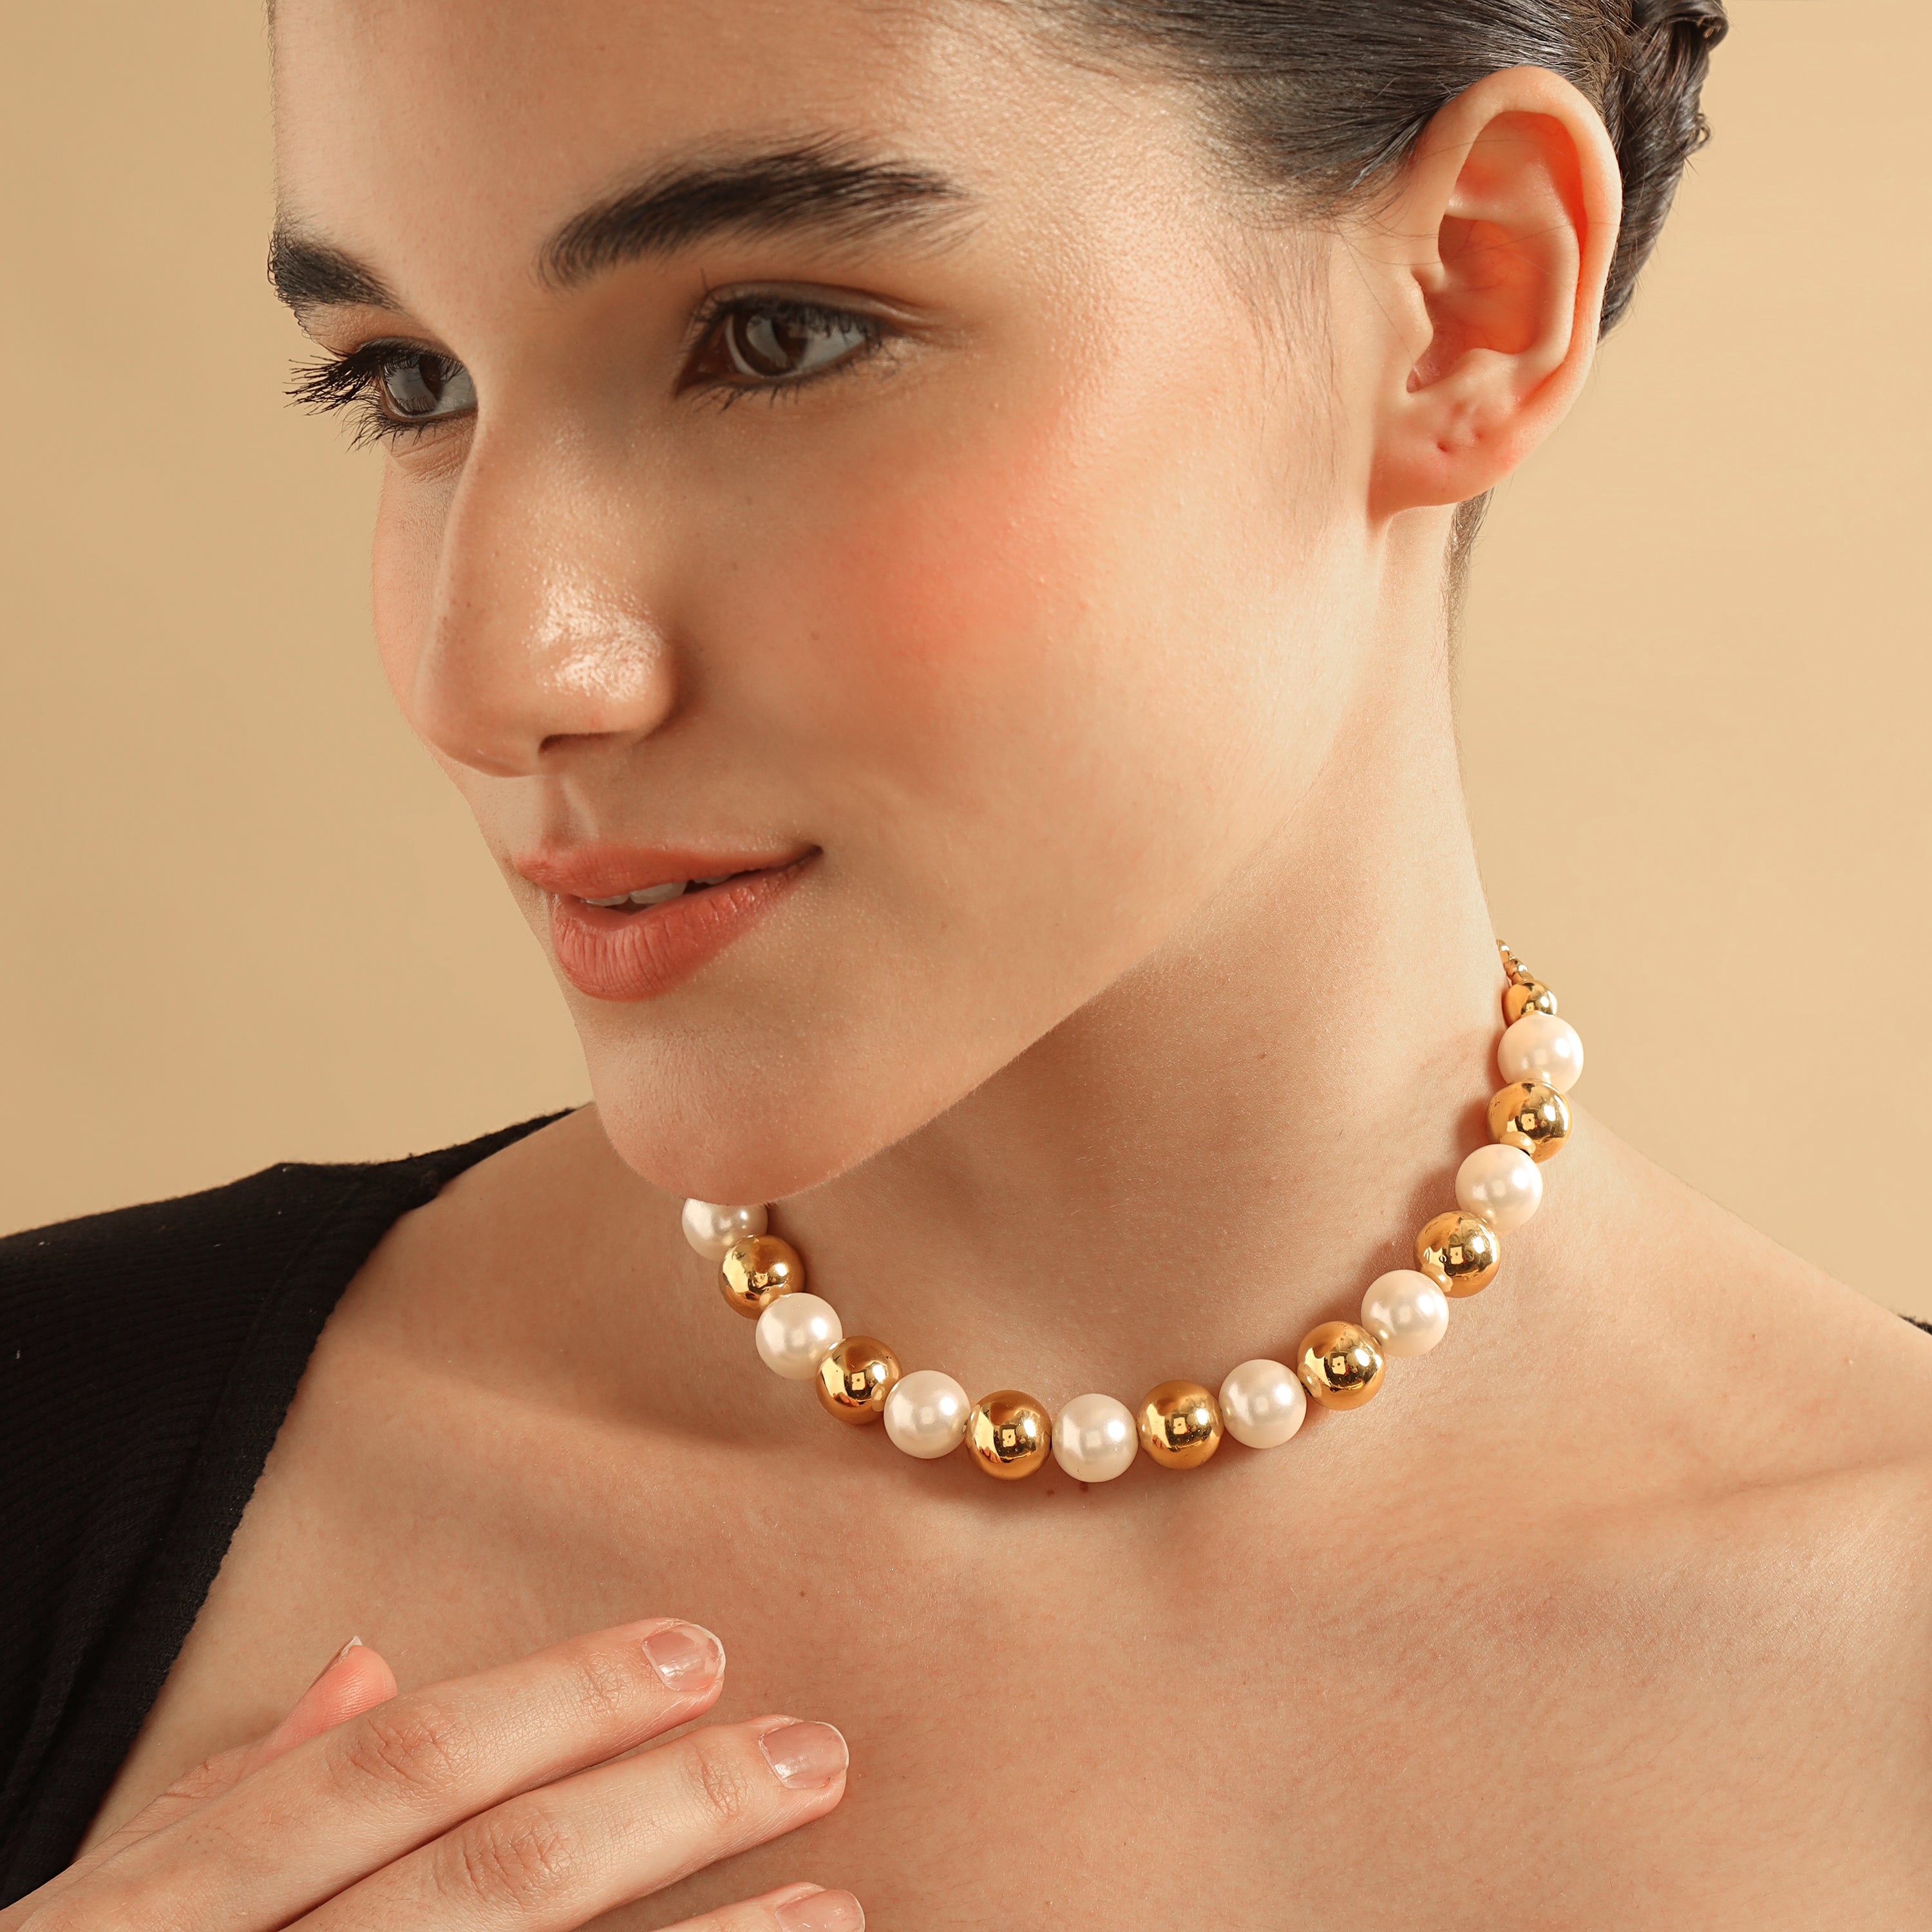 TFC Pearl and Gold Bead Choker Necklace-Enhance your elegance with our collection of gold-plated necklaces for women. Choose from stunning pendant necklaces, chic choker necklaces, and trendy layered necklaces. Our sleek and dainty designs are both affordable and anti-tarnish, ensuring lasting beauty. Enjoy the cheapest fashion jewellery, lightweight and stylish- only at The Fun Company.